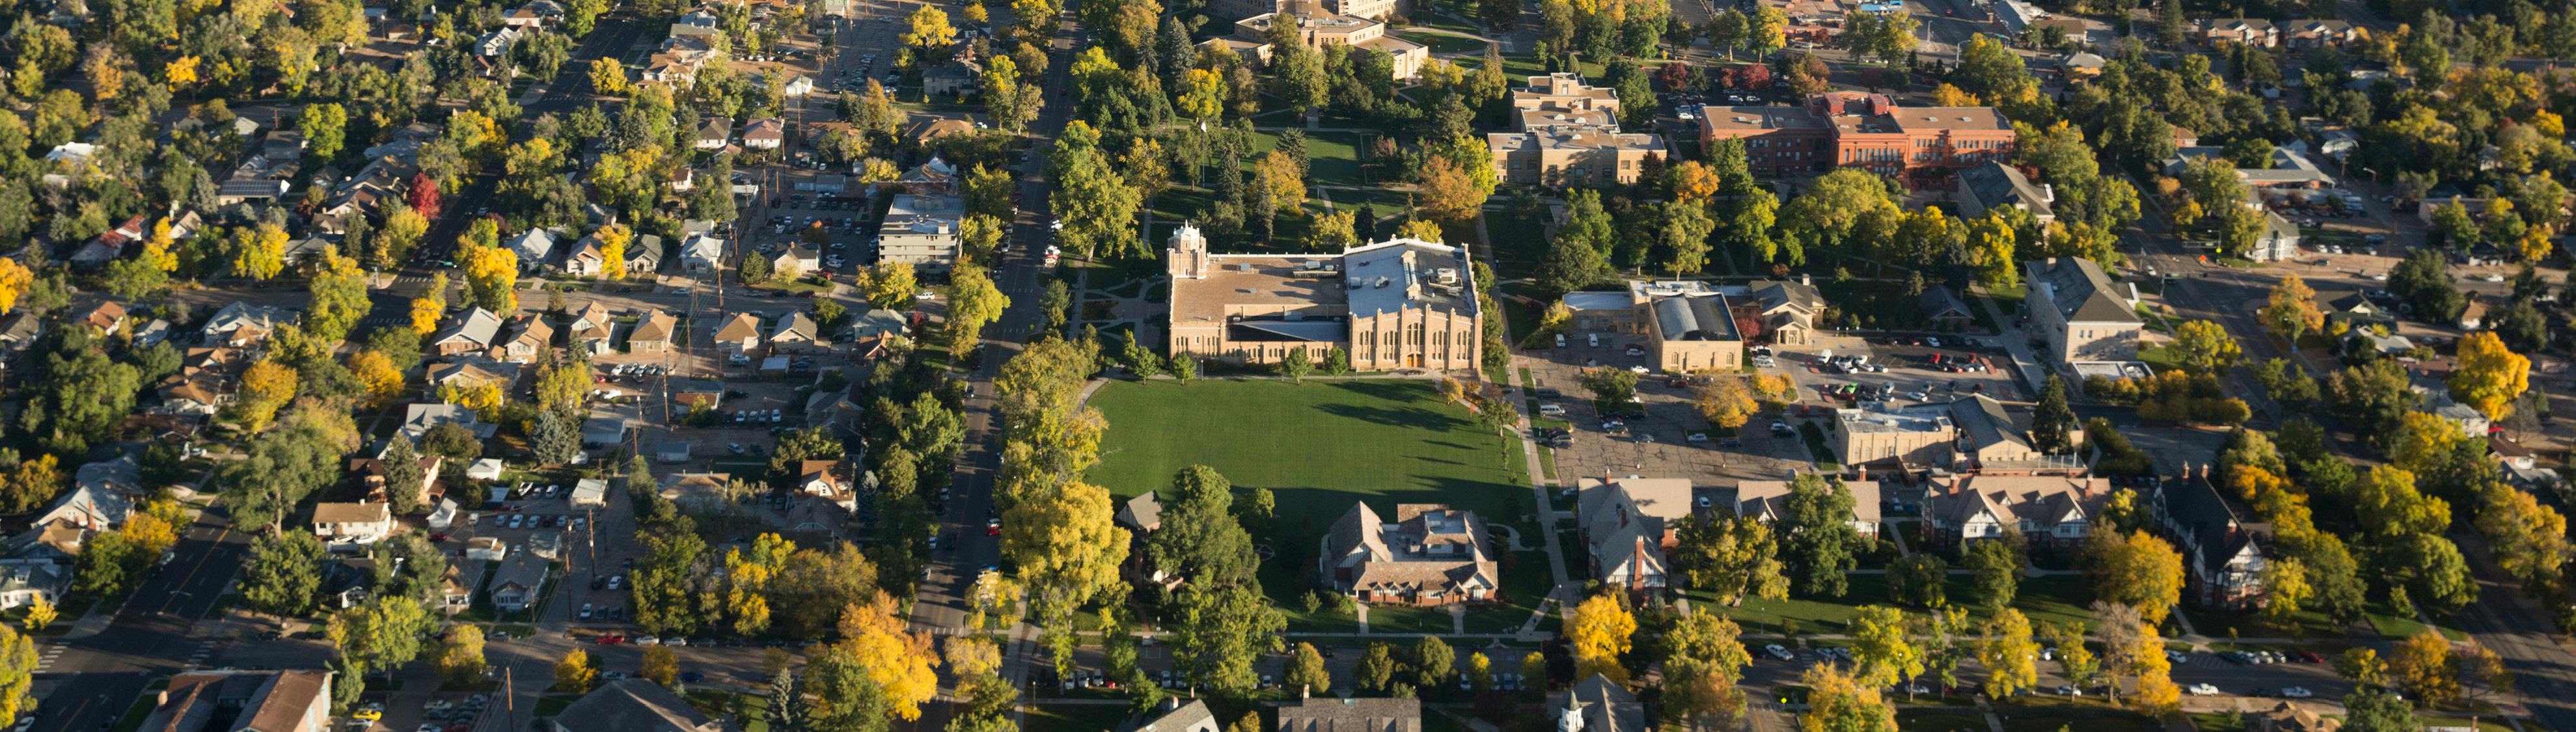 An aerial view of Greeley and UNC campus